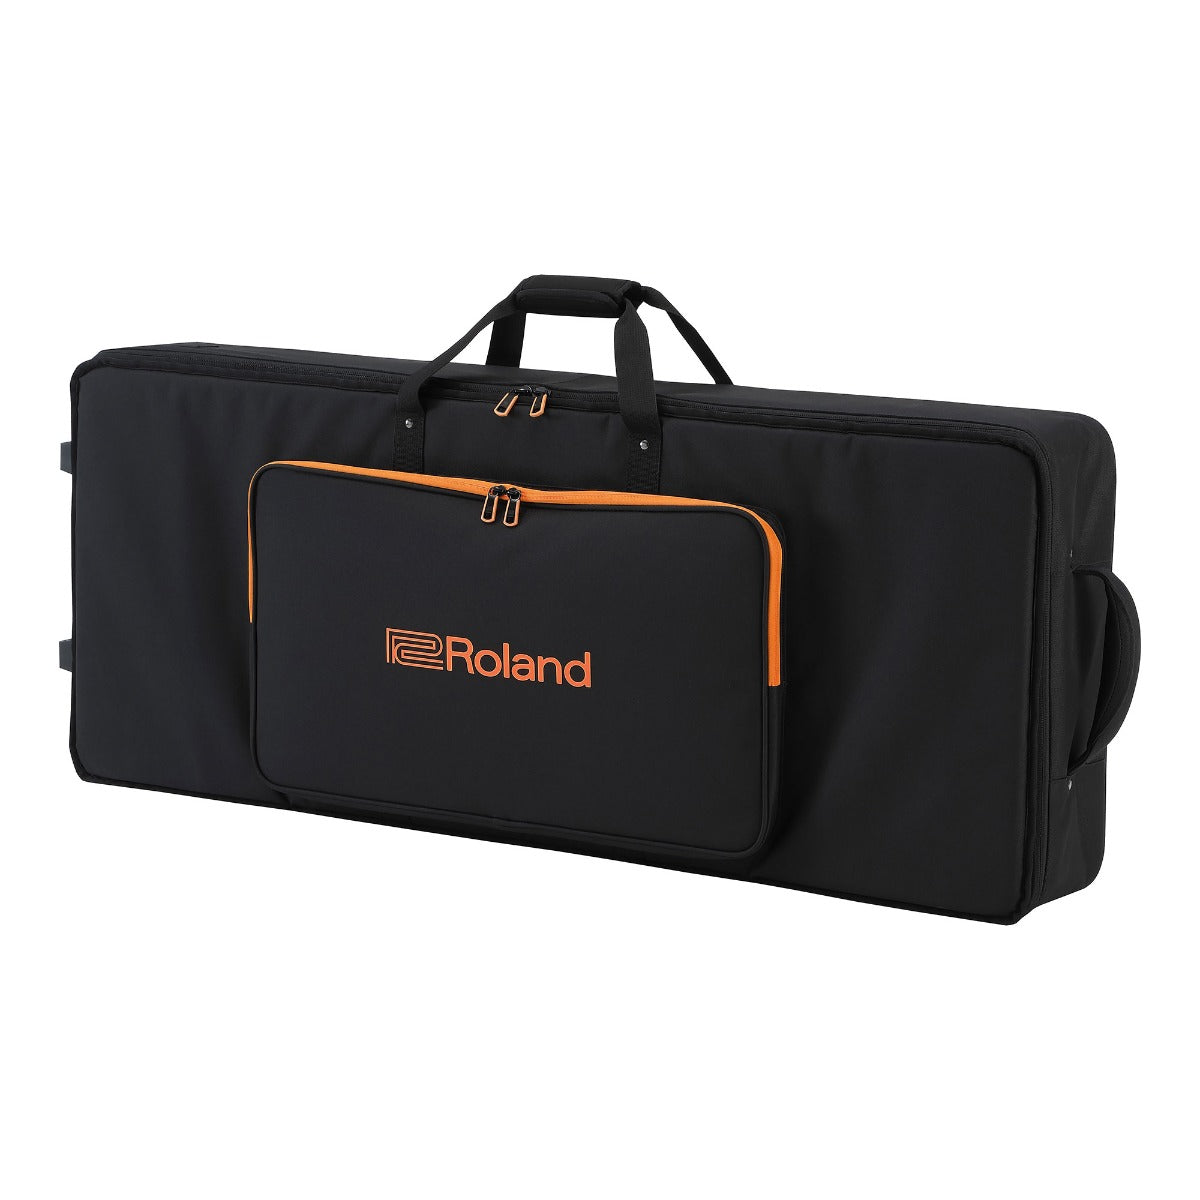 Image of the Roland SC-G61W3 Keyboard Soft Case